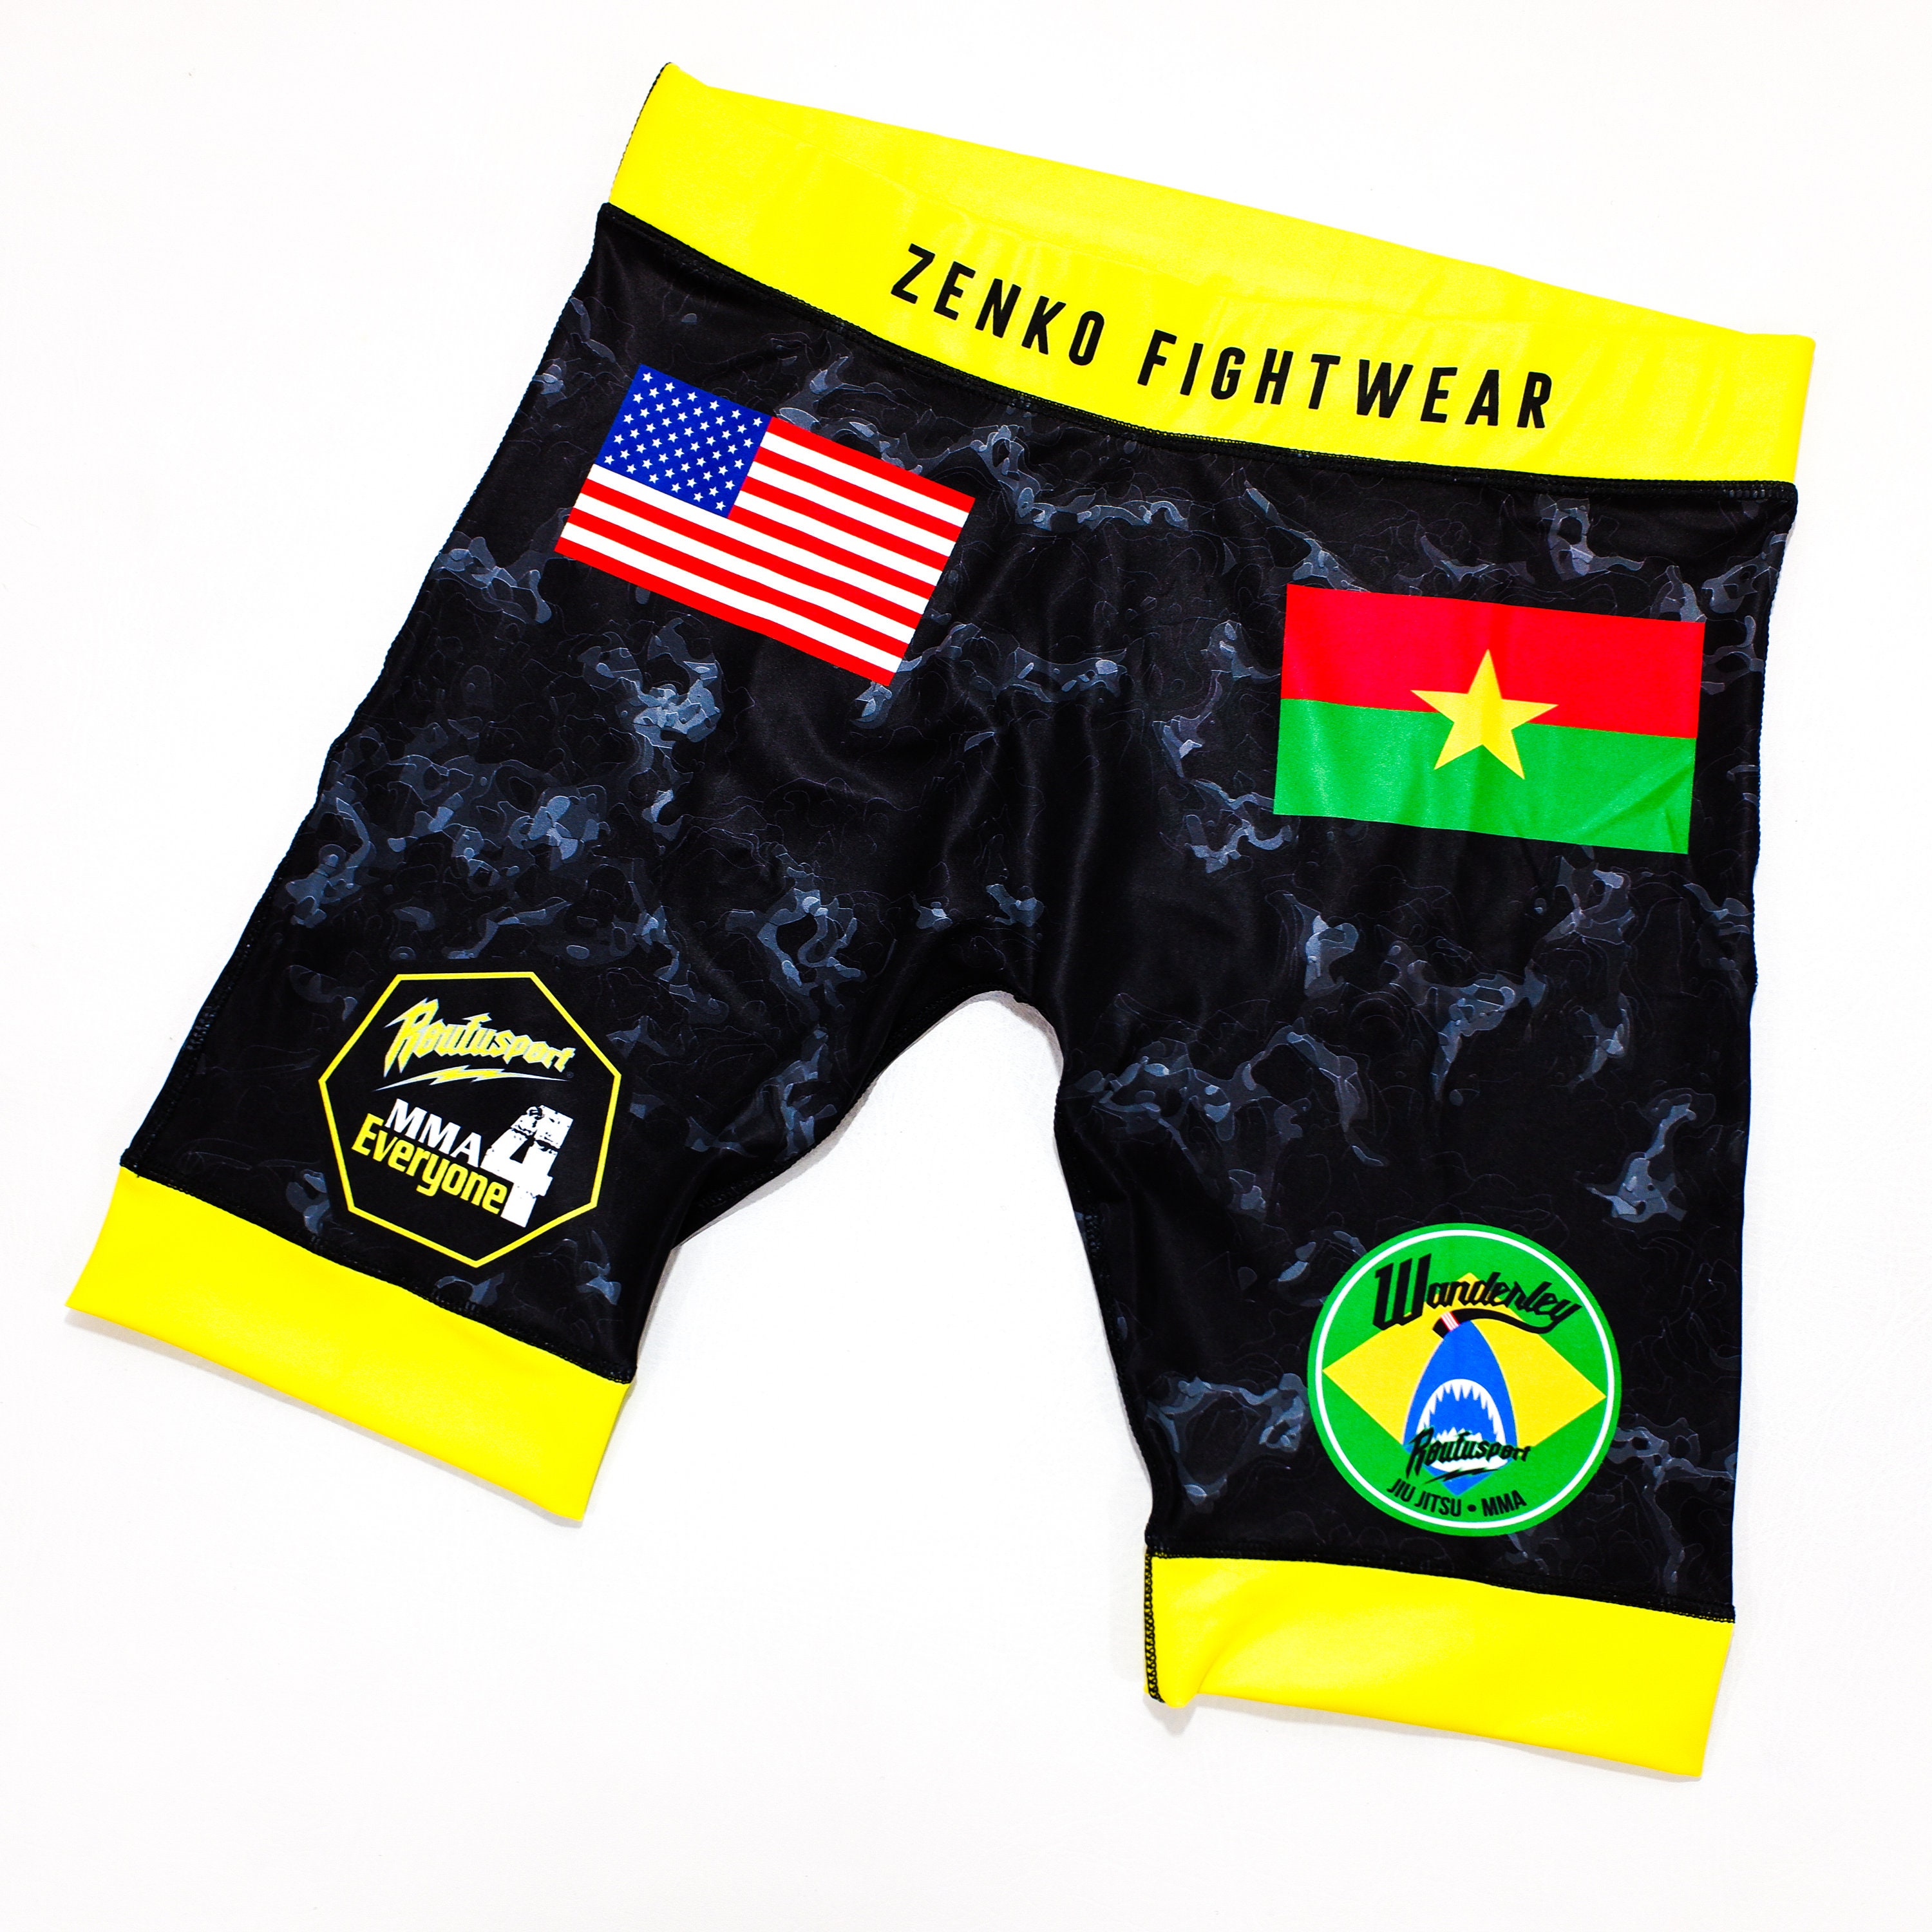 Custom BJJ MMA Fight Shorts Customized Sublimated Grappling